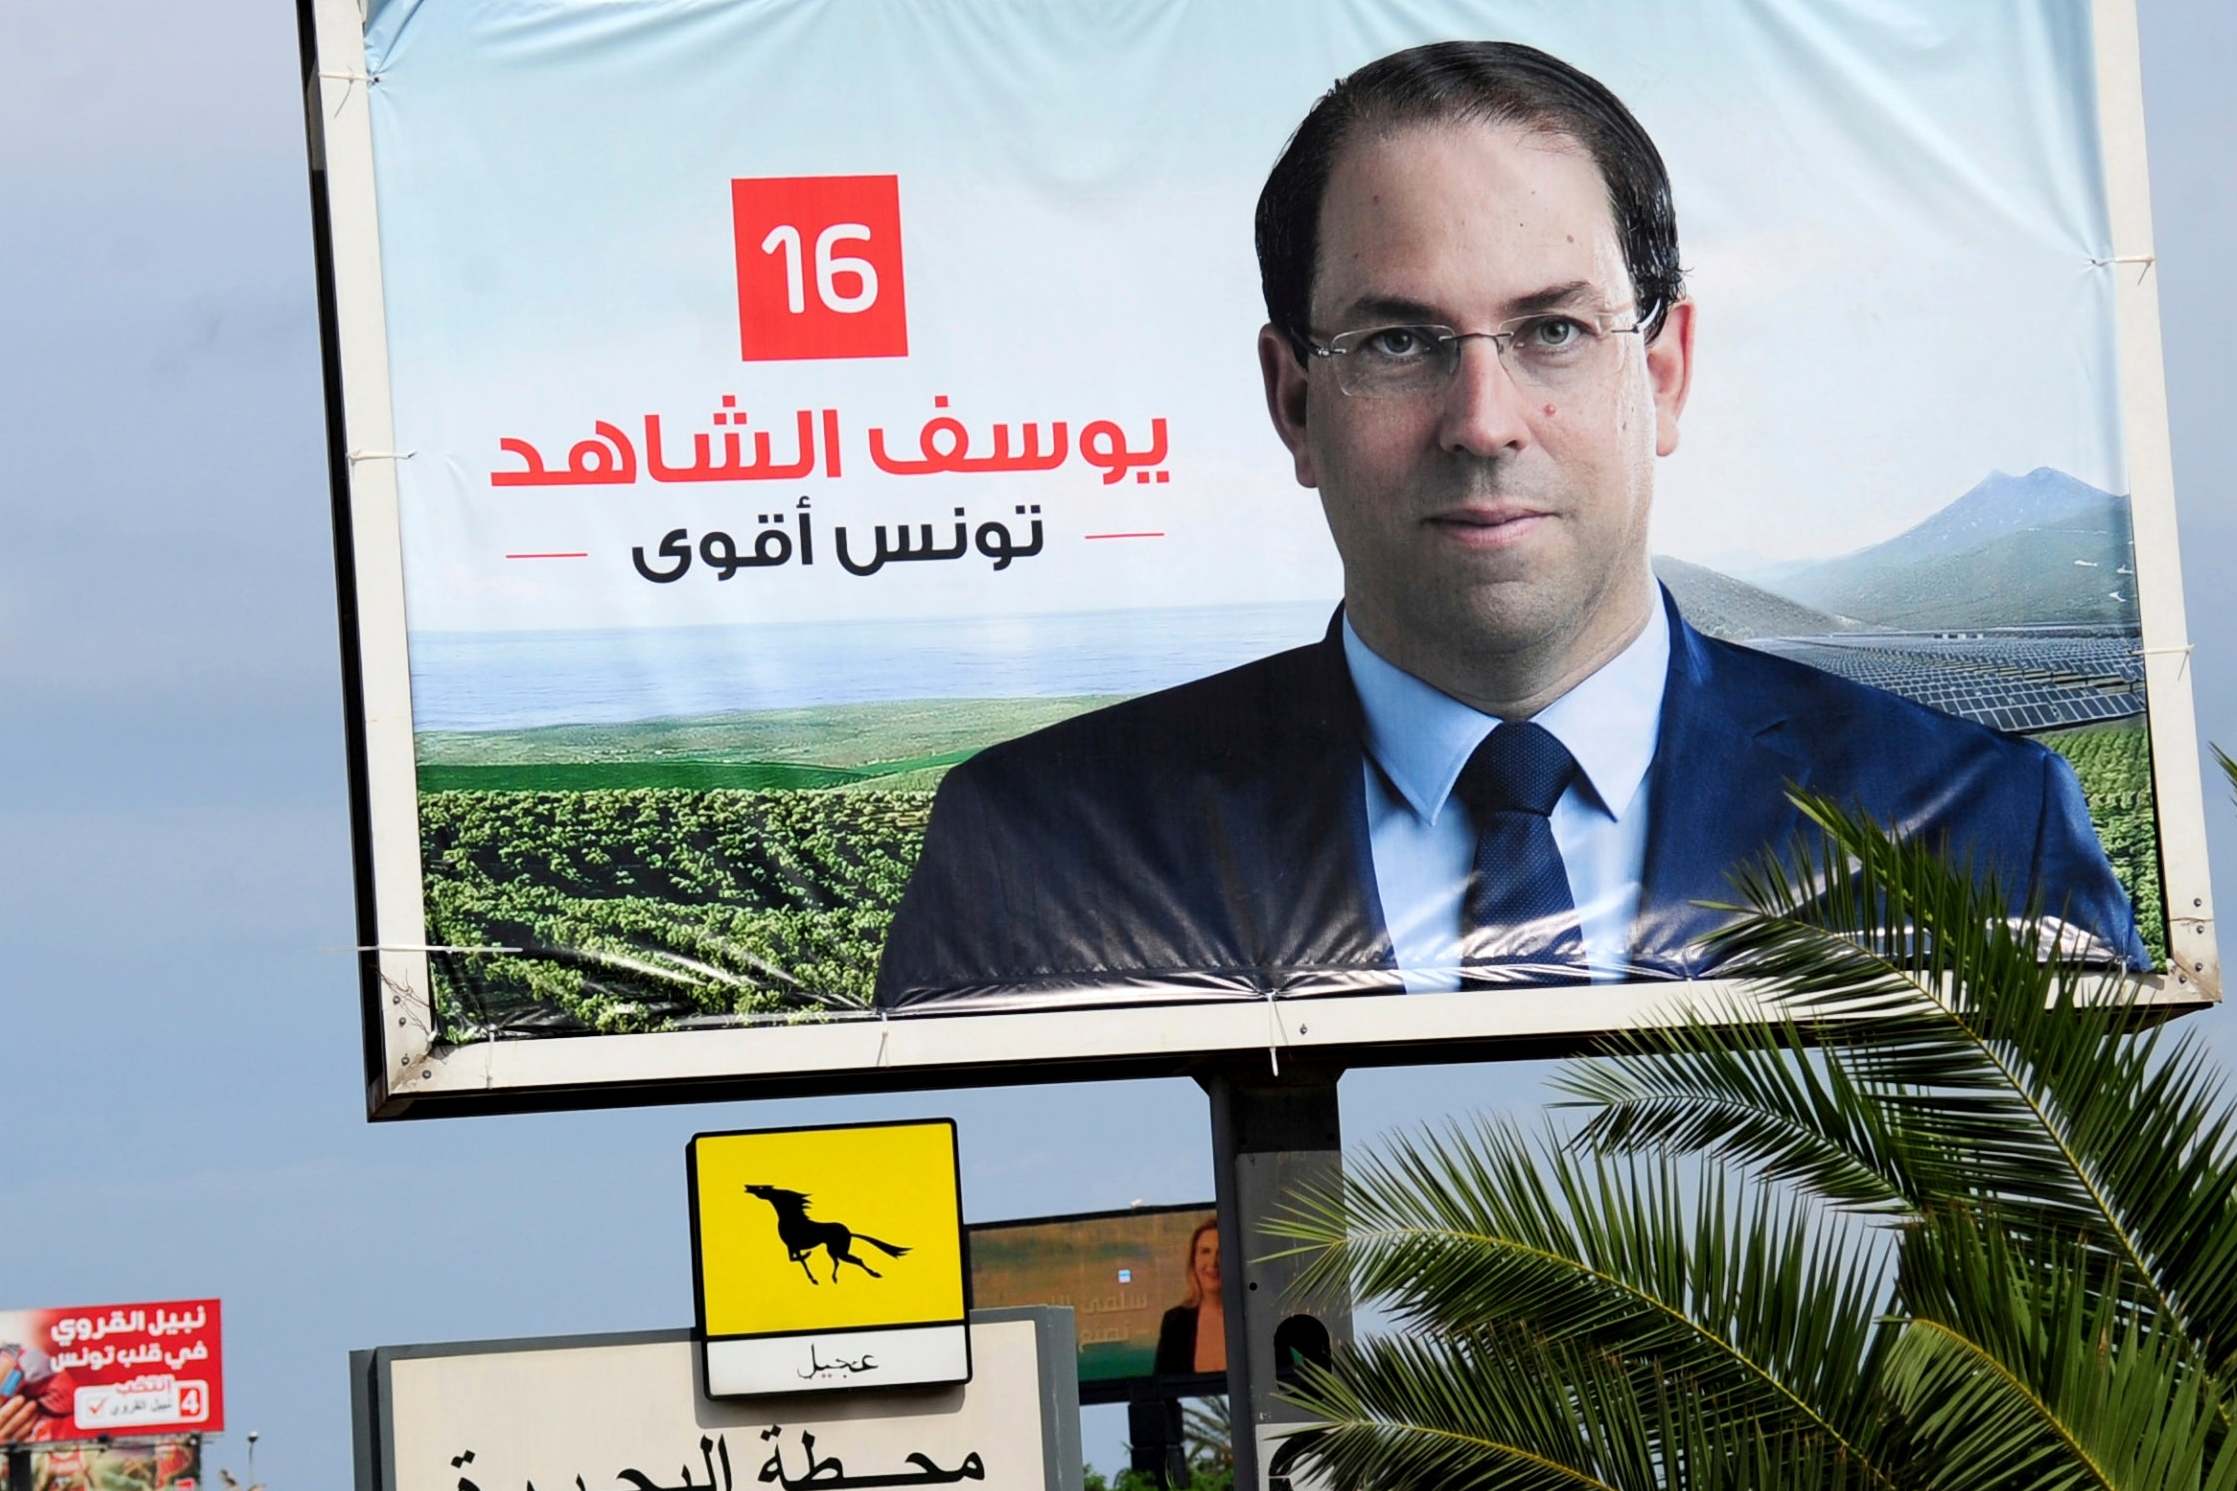 Electoral poster for prime minister and presidential candidate Youssef Chahed